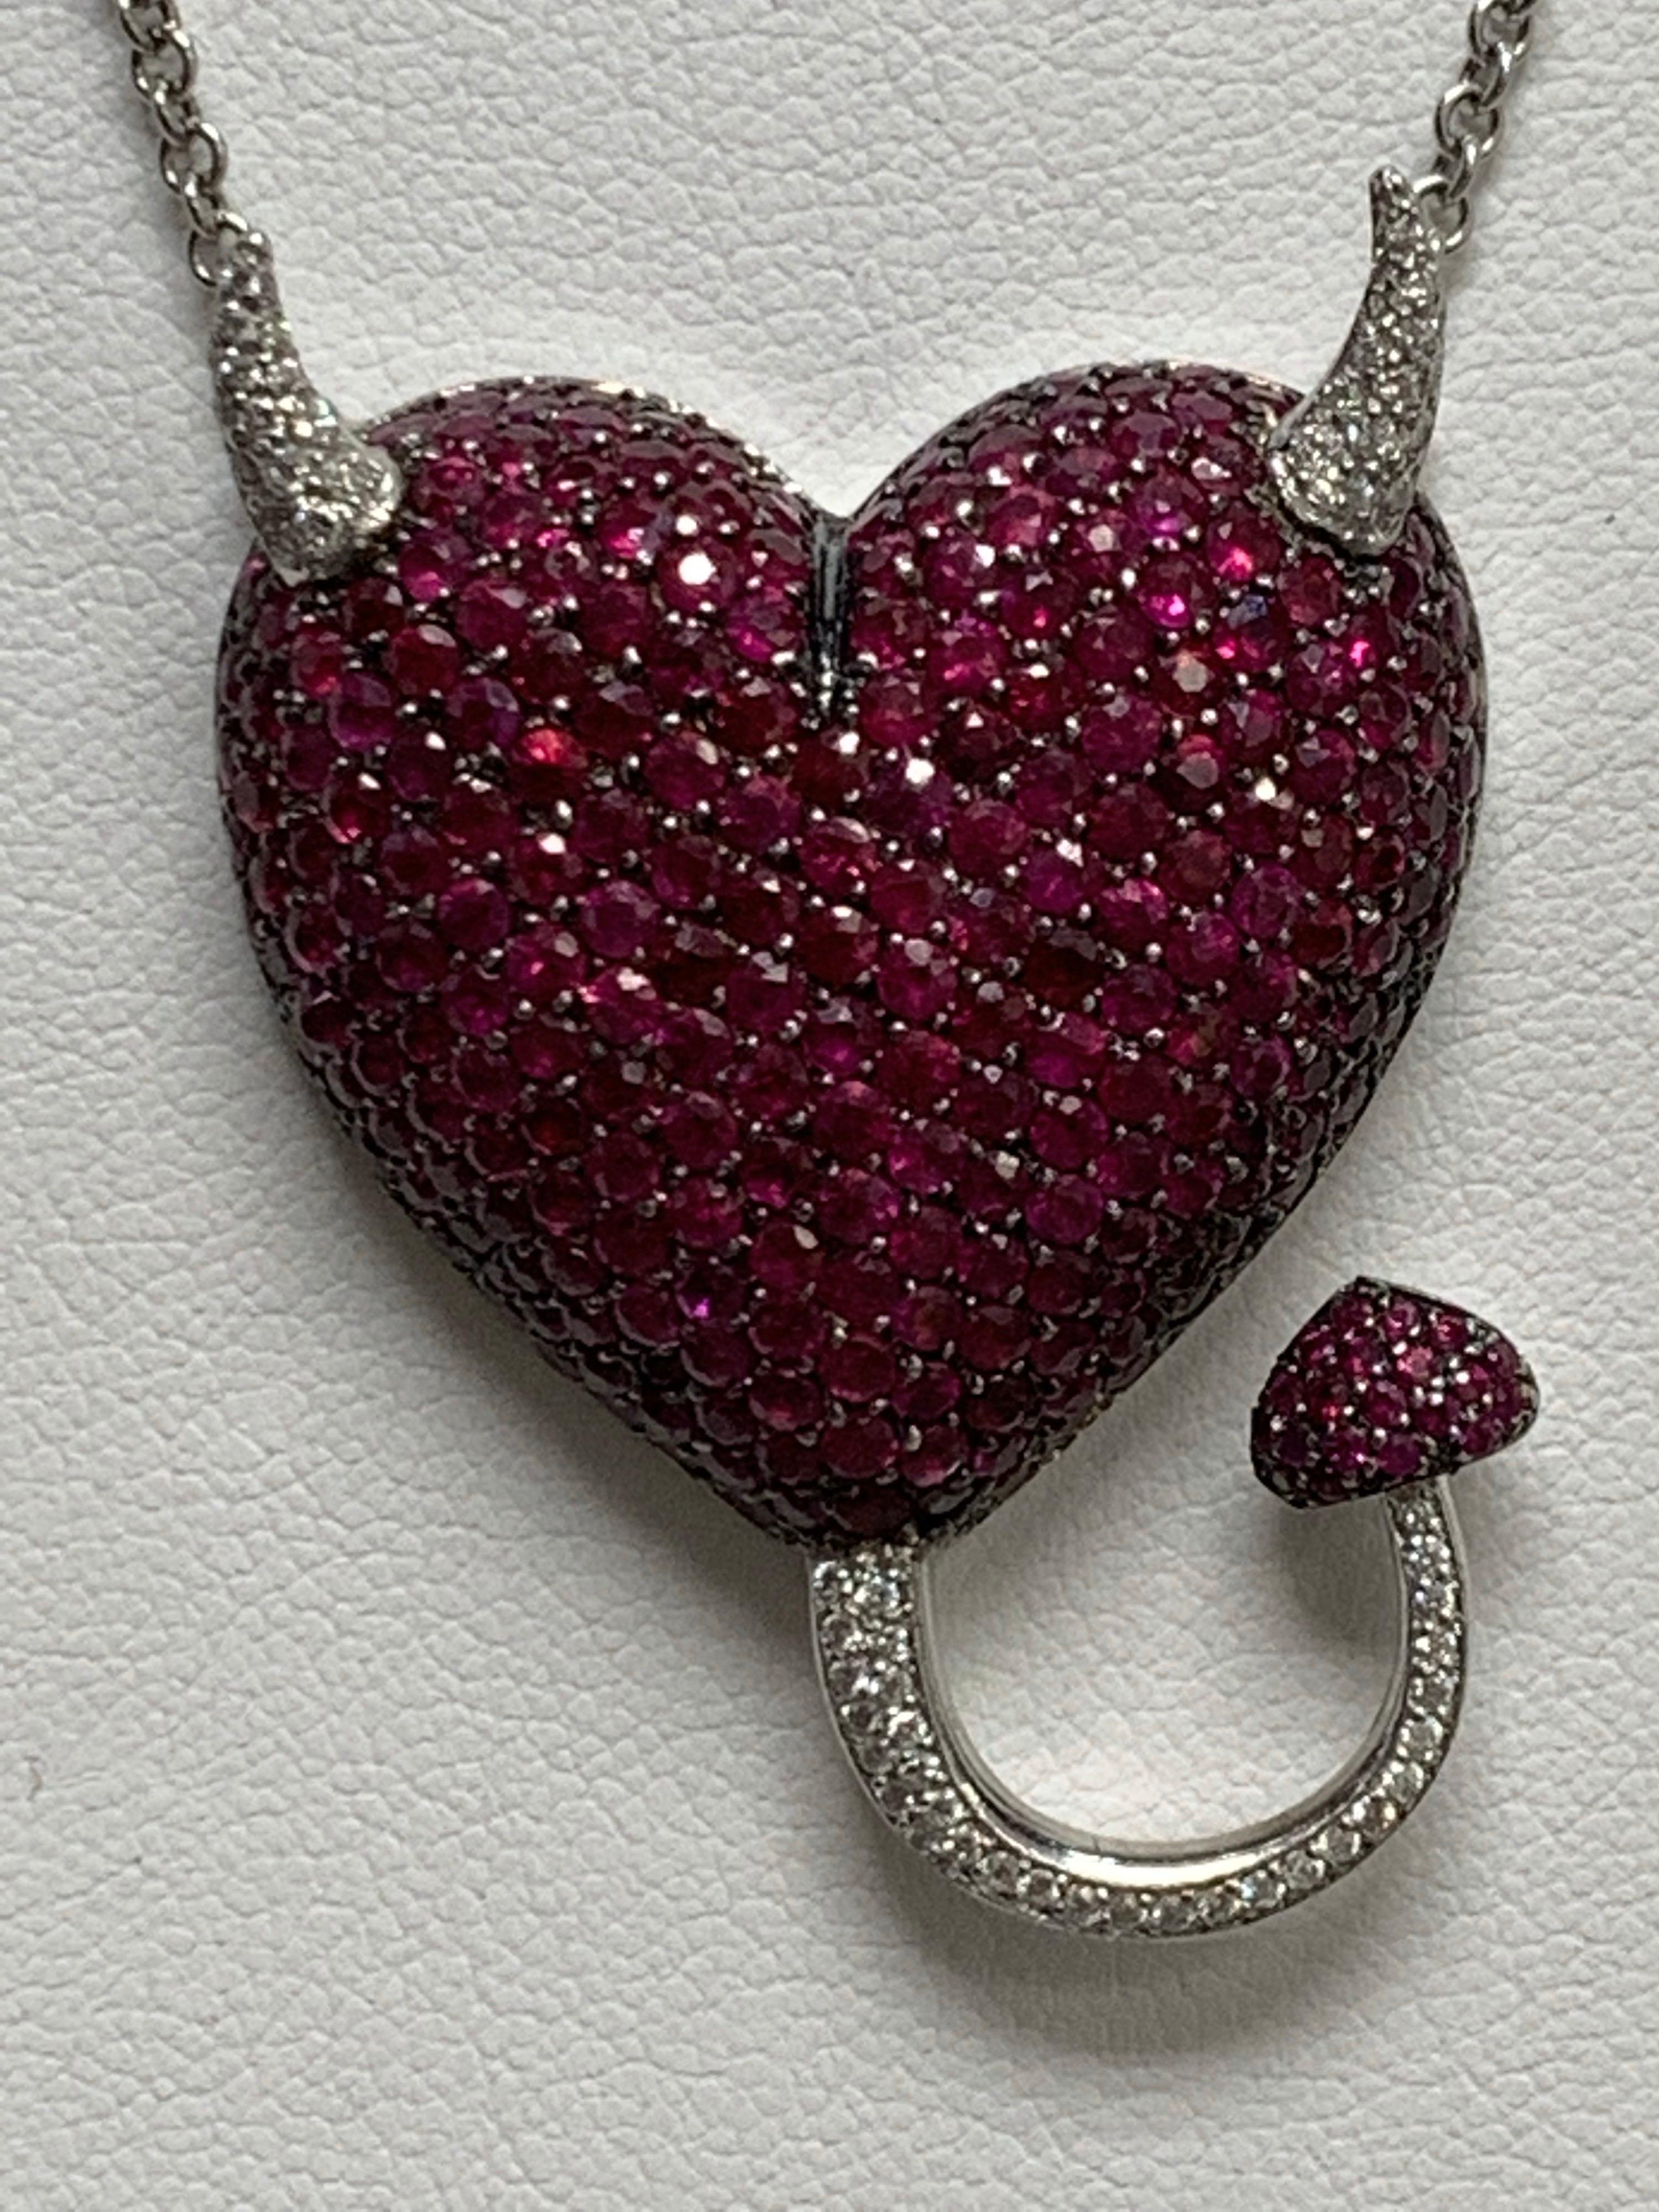 Ruby & Diamond Heart Necklace, 9.15 Carats

Featuring a Ruby & Diamond Heart Necklace with a total weight of 9.15 carats; Rubies, 8.78 carats; White Diamonds, 0.37 carats, set in 18K White Gold with Adjustable Chain, Size 14